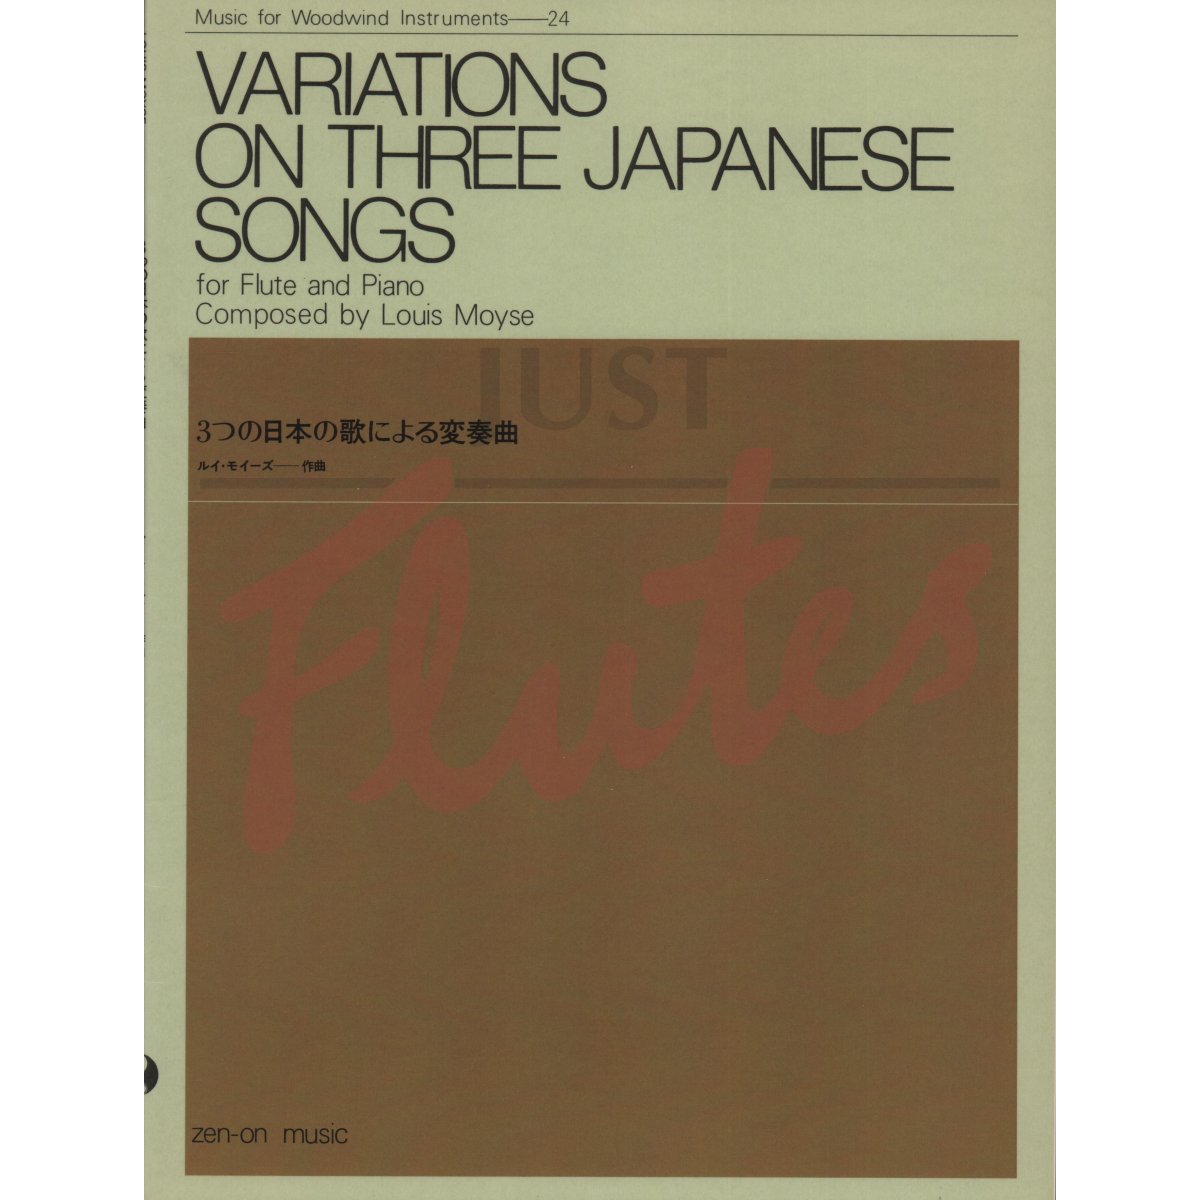 Variations on Three Japanese Songs for Flute and Piano